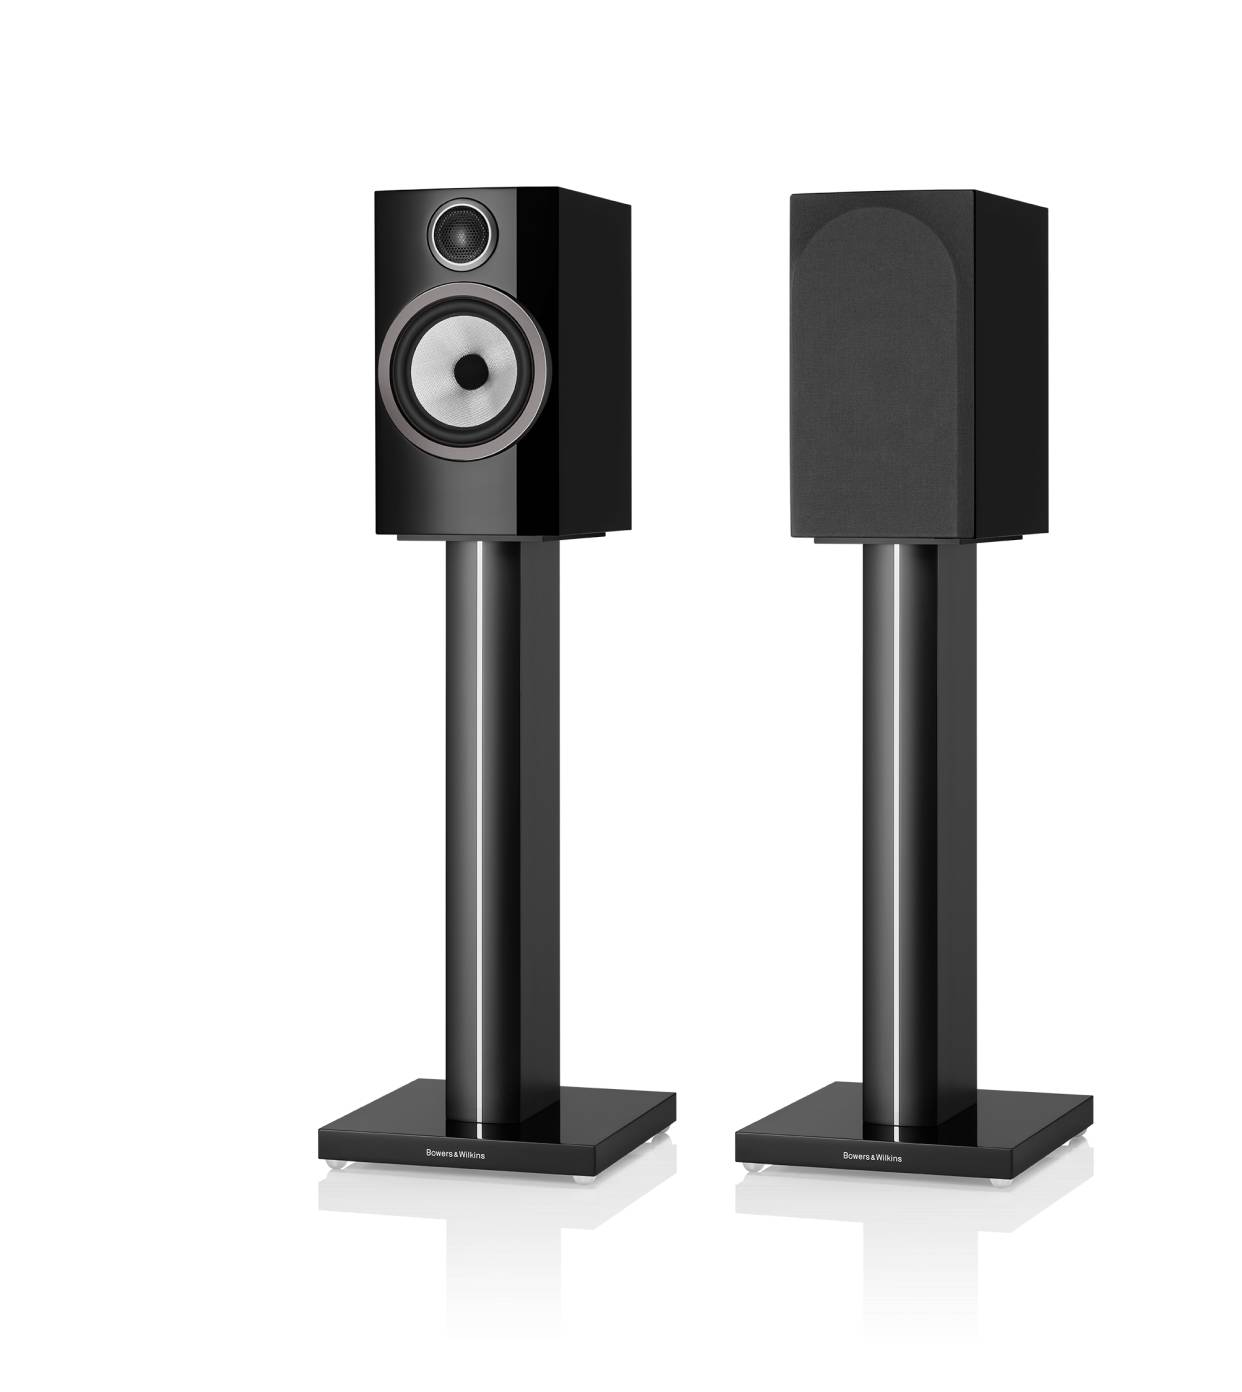 Bowers & Wilkins-Bower & Wilkins 706 S3 pair without stands-PremiumHIFI